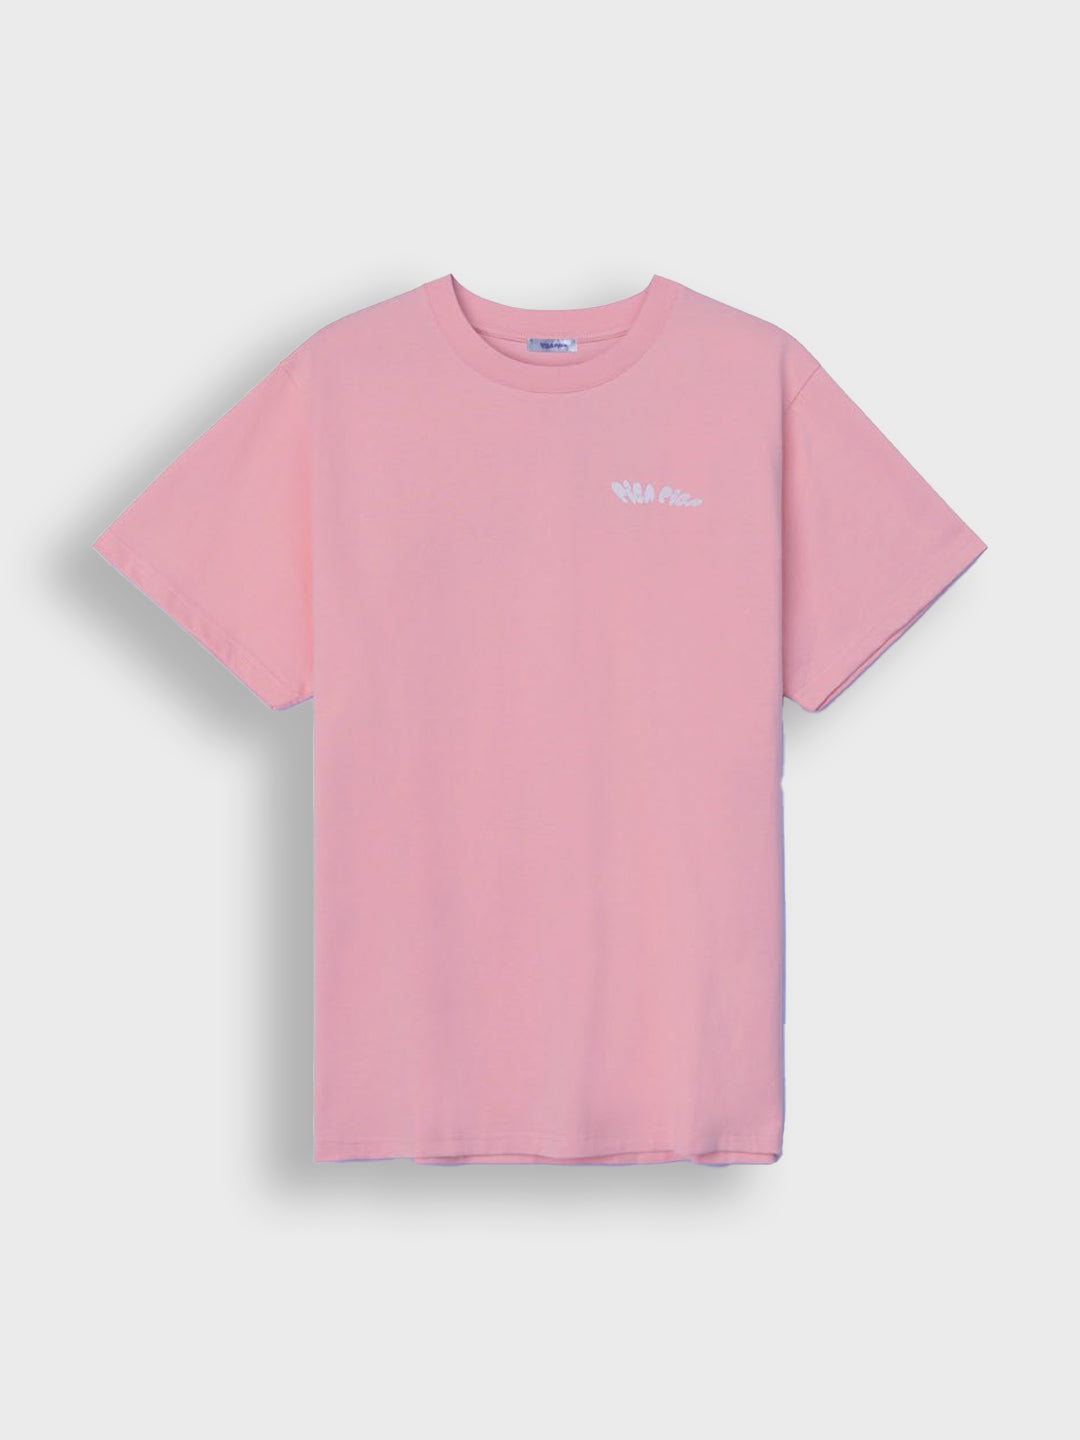 Pica Pica Flowerboys T-Shirt | Pink